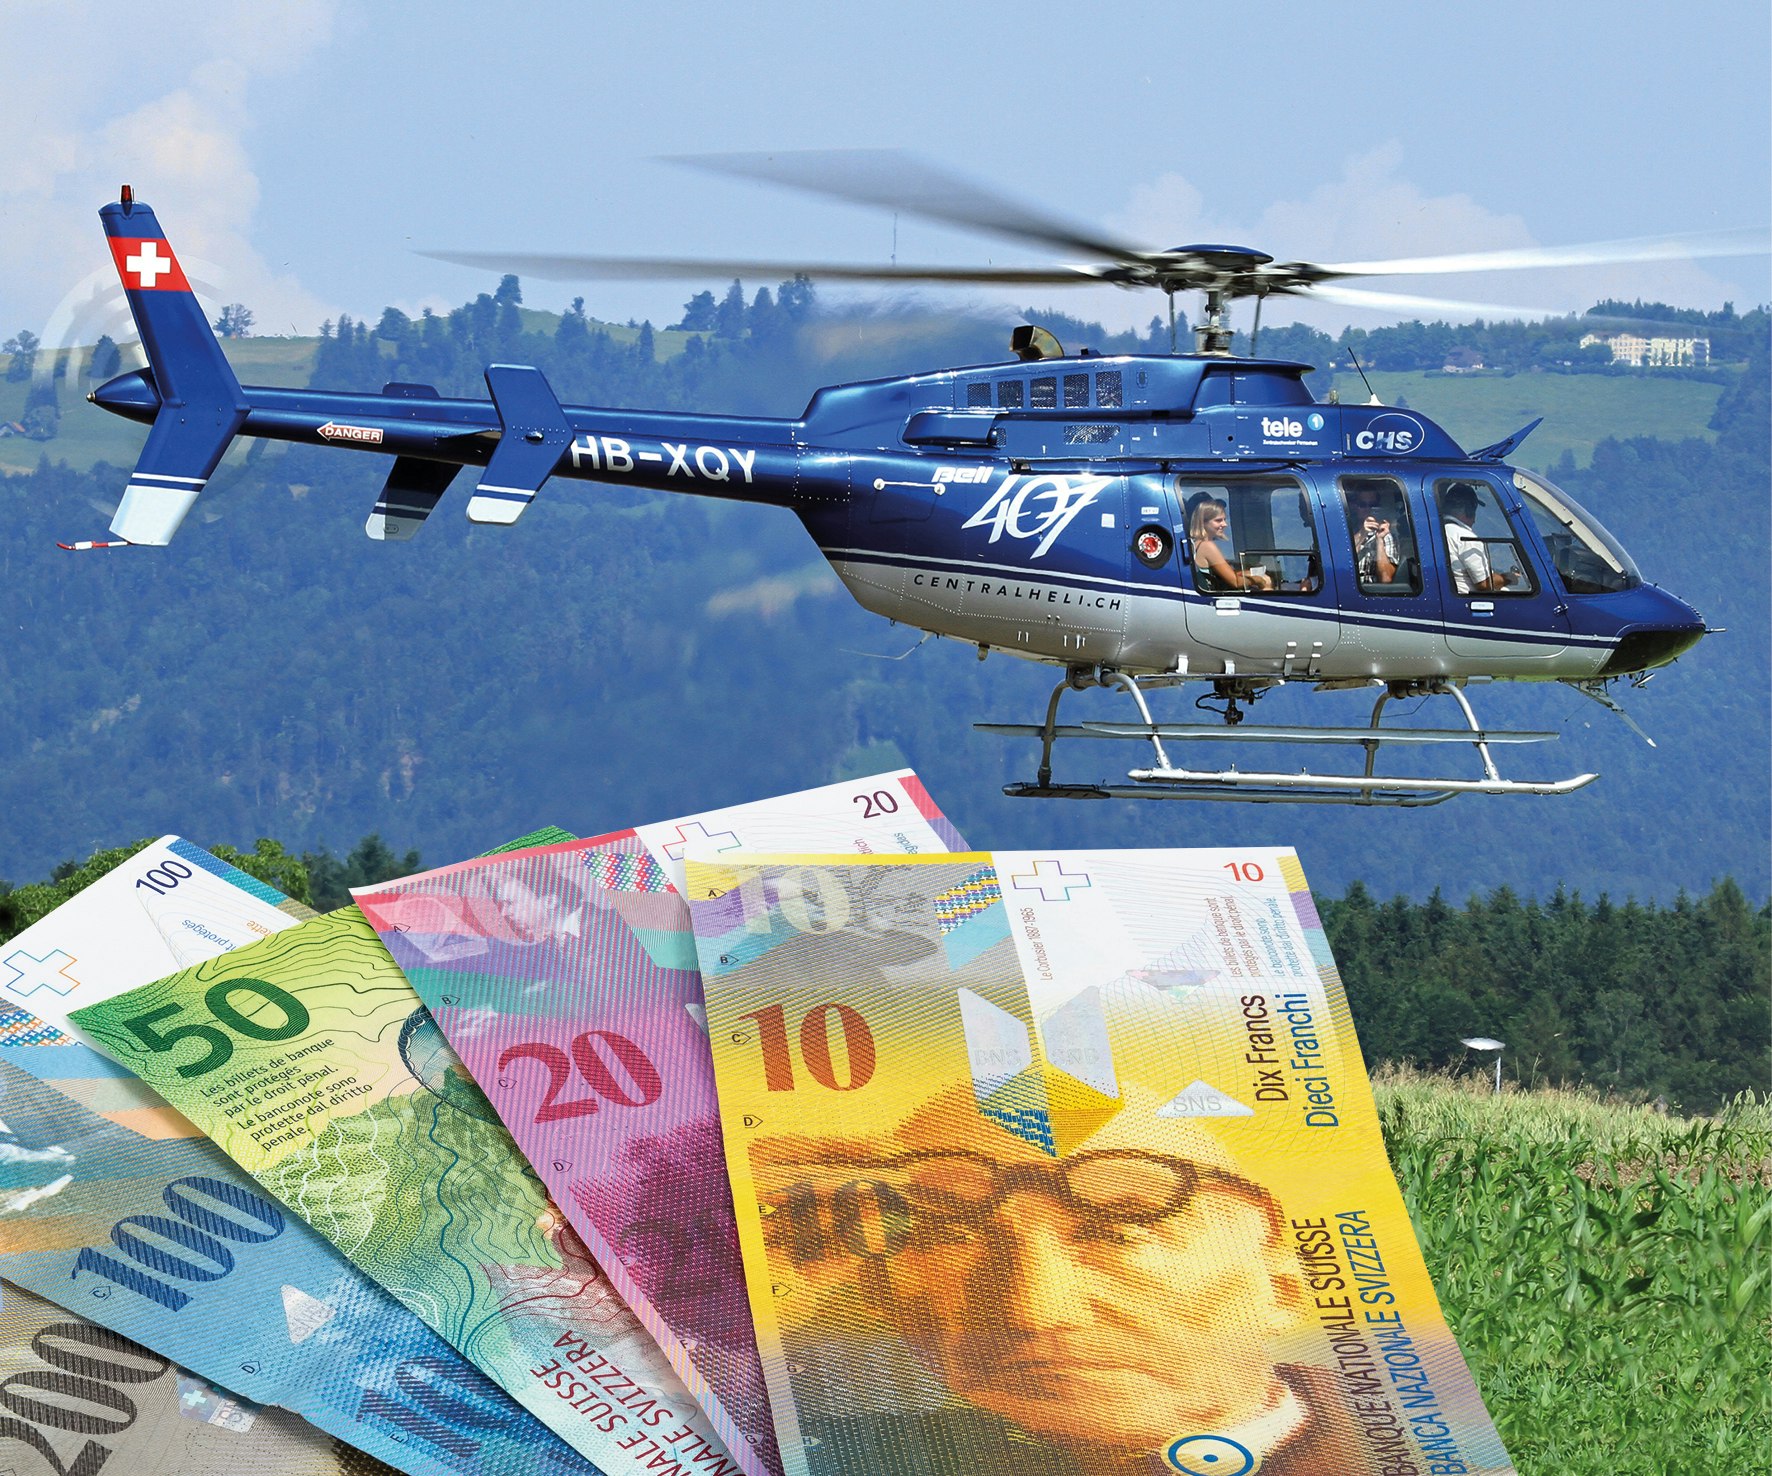 Voucher for helicopter fligth ab CHF 250.-